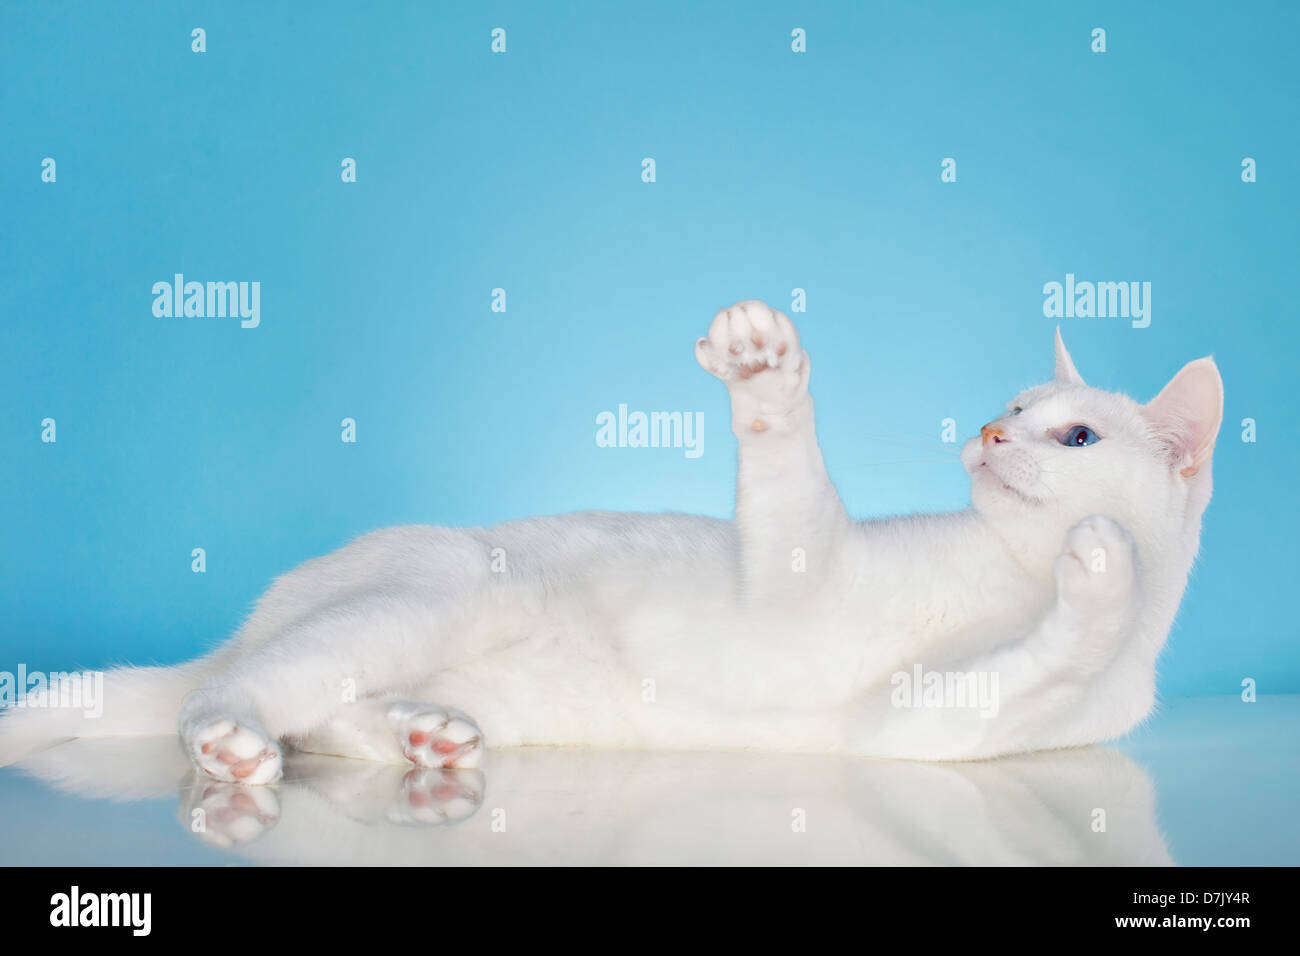 Pure white cat with blue eyes in playful mood against blue background Stock Photo